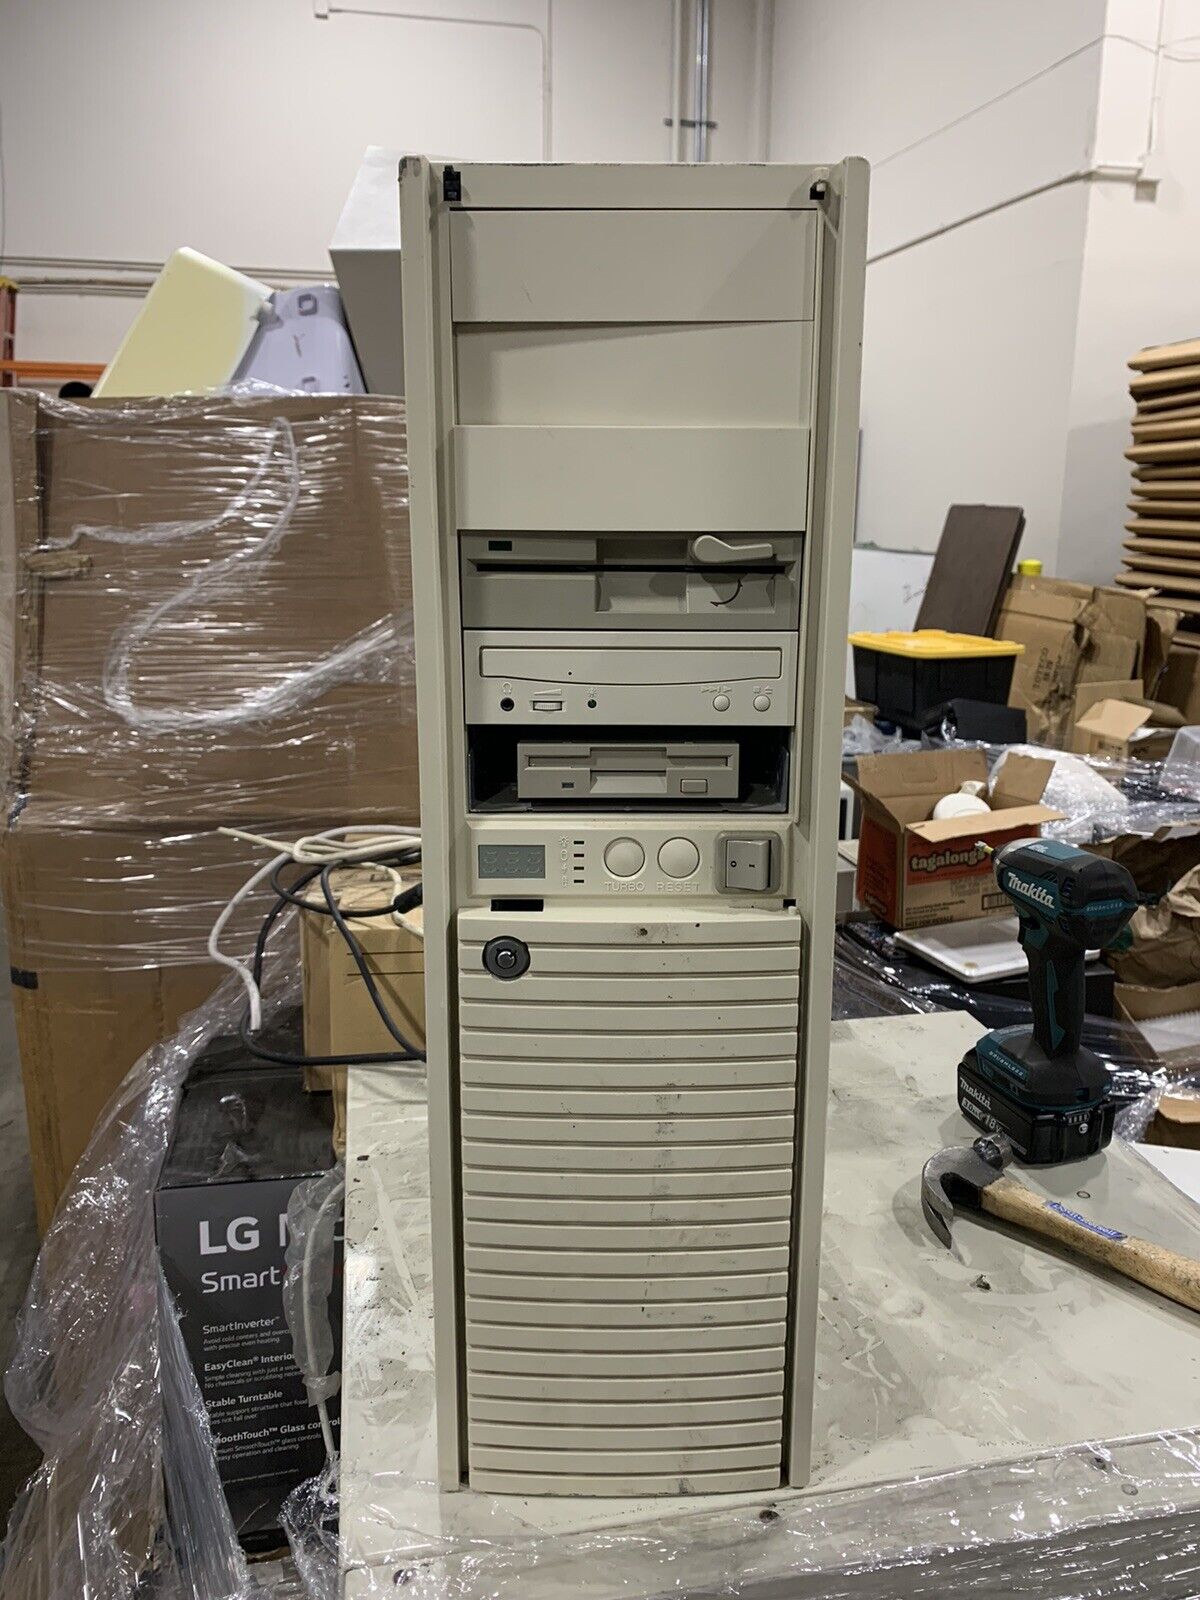 Vintage Full Height AT Computer Tower Case With 5.25/3.5 Floppy Drives, CD, PSU